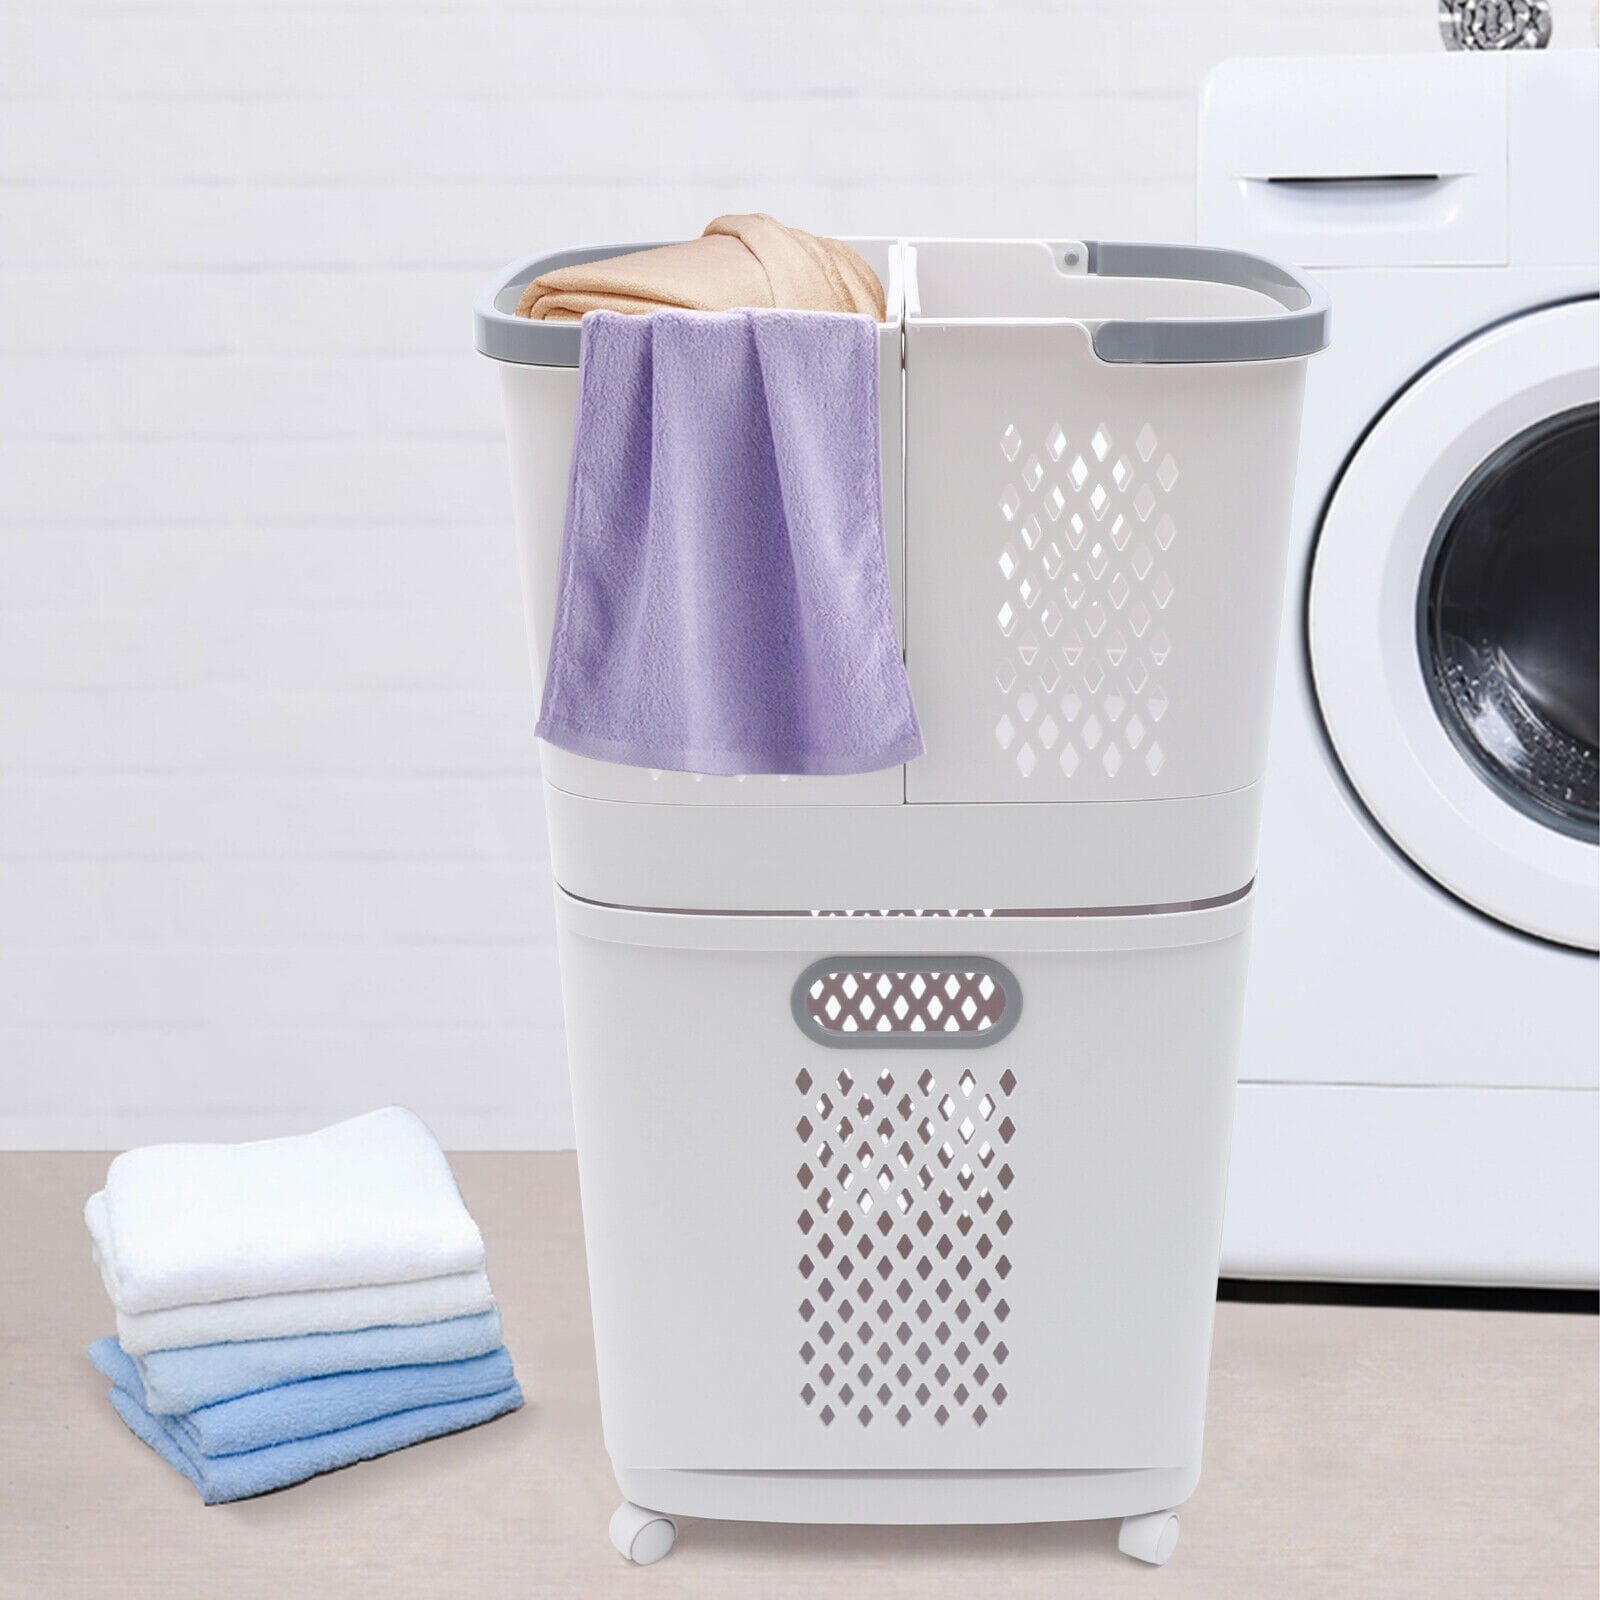 https://ak1.ostkcdn.com/images/products/is/images/direct/346f1122fbb256809d2a2ca8d54ca7361afaa715/2-Tier-Laundry-Basket-Vertical-Standing-Rolling-Laundry-Sorter-Hamper.jpg